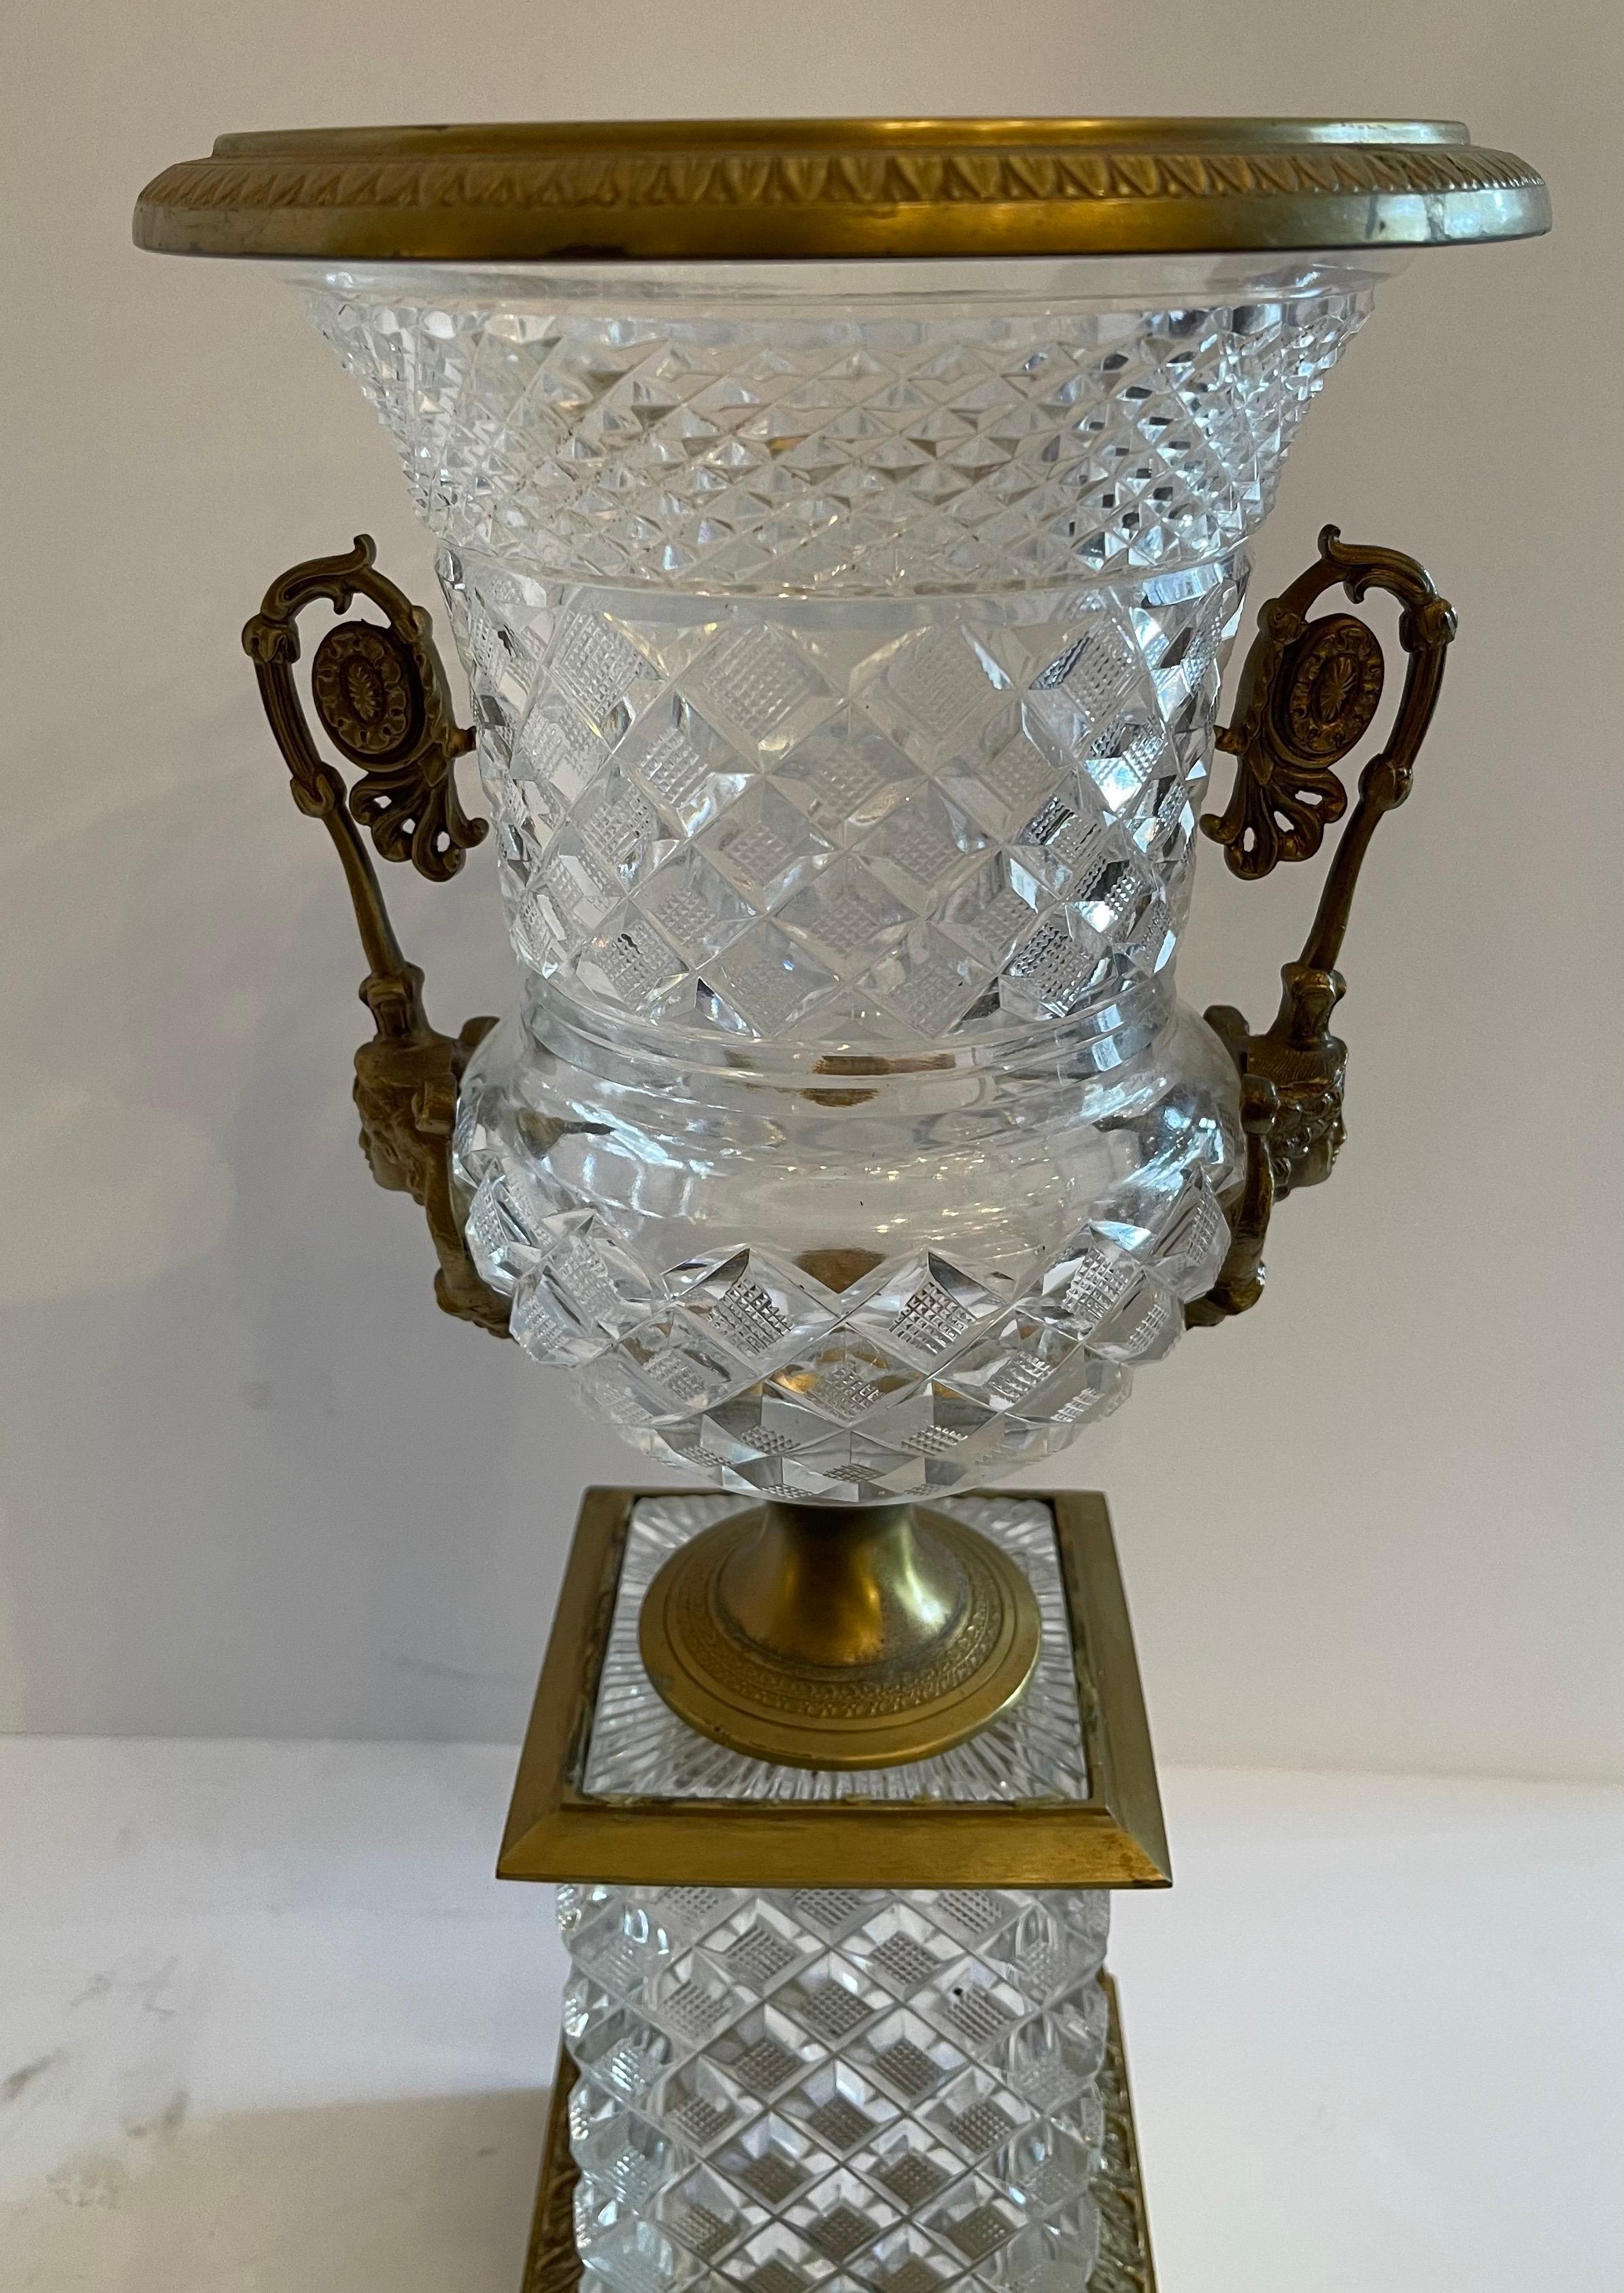 A wonderful French Empire / neoclassical cut crystal and bronze ormolu mounted urn with lady figure handles centerpiece.

 